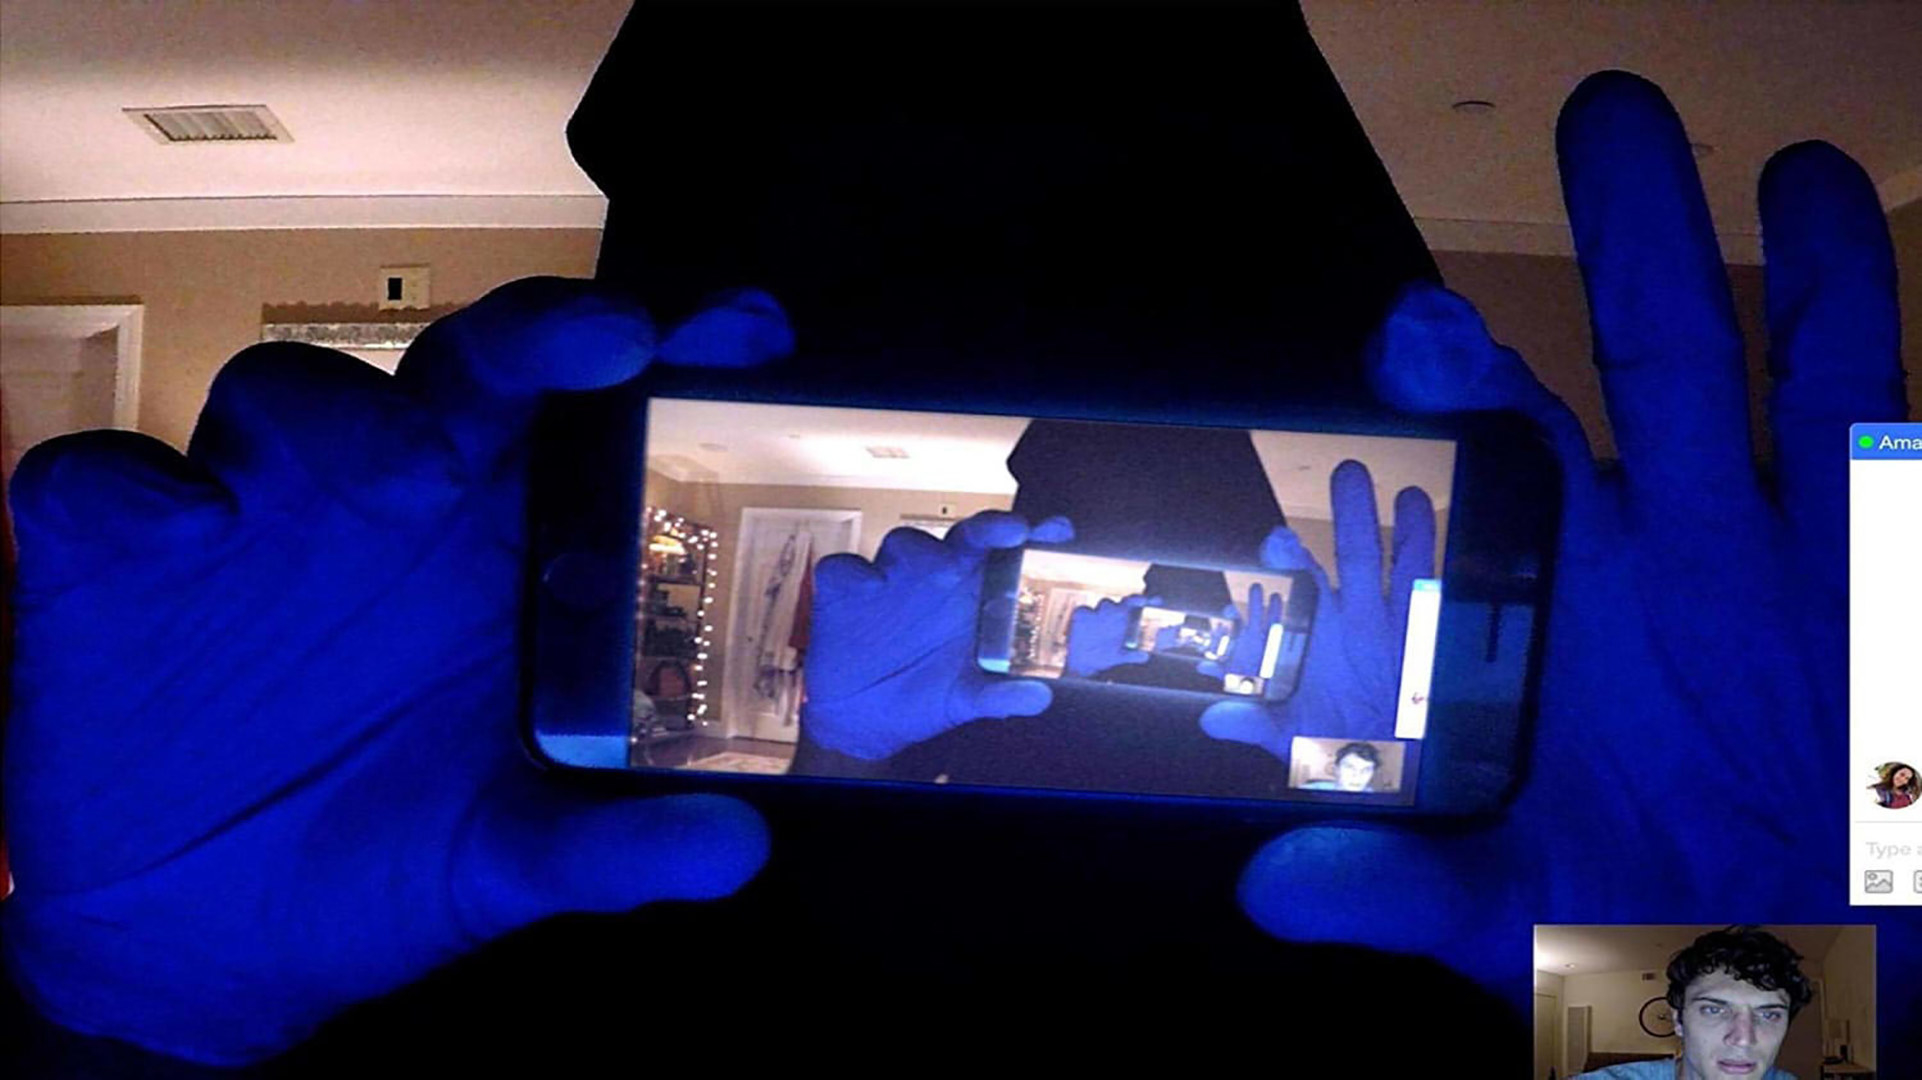 An ominous figure demonstrates their terrifying technological prowess in &quot;Unfriended: Dark Web&quot;